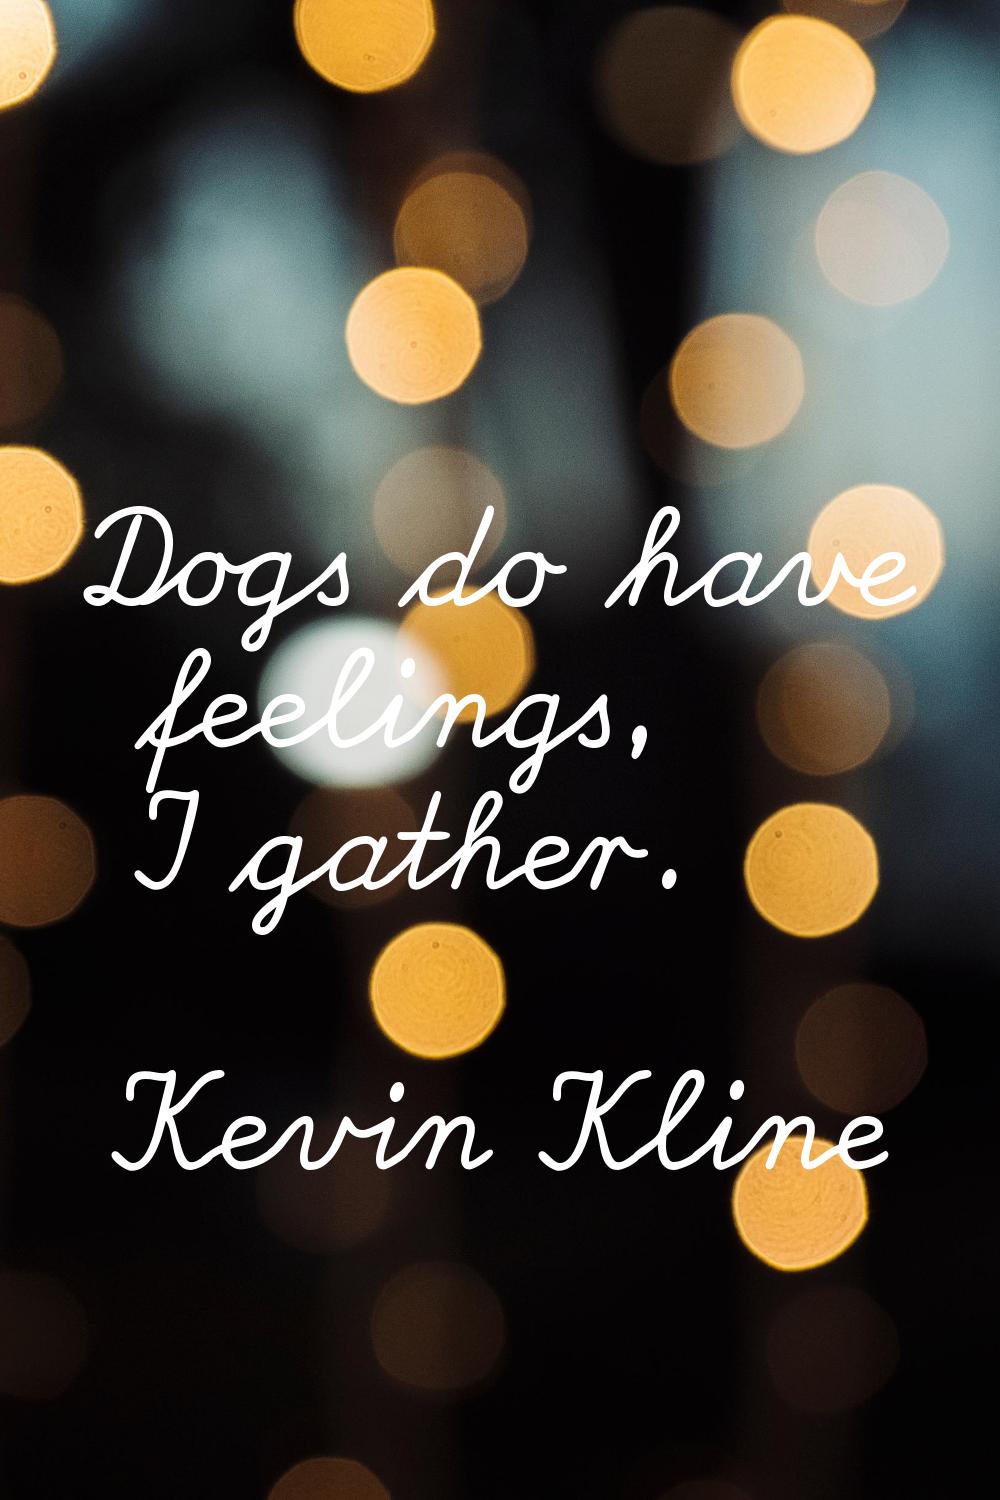 Dogs do have feelings, I gather.